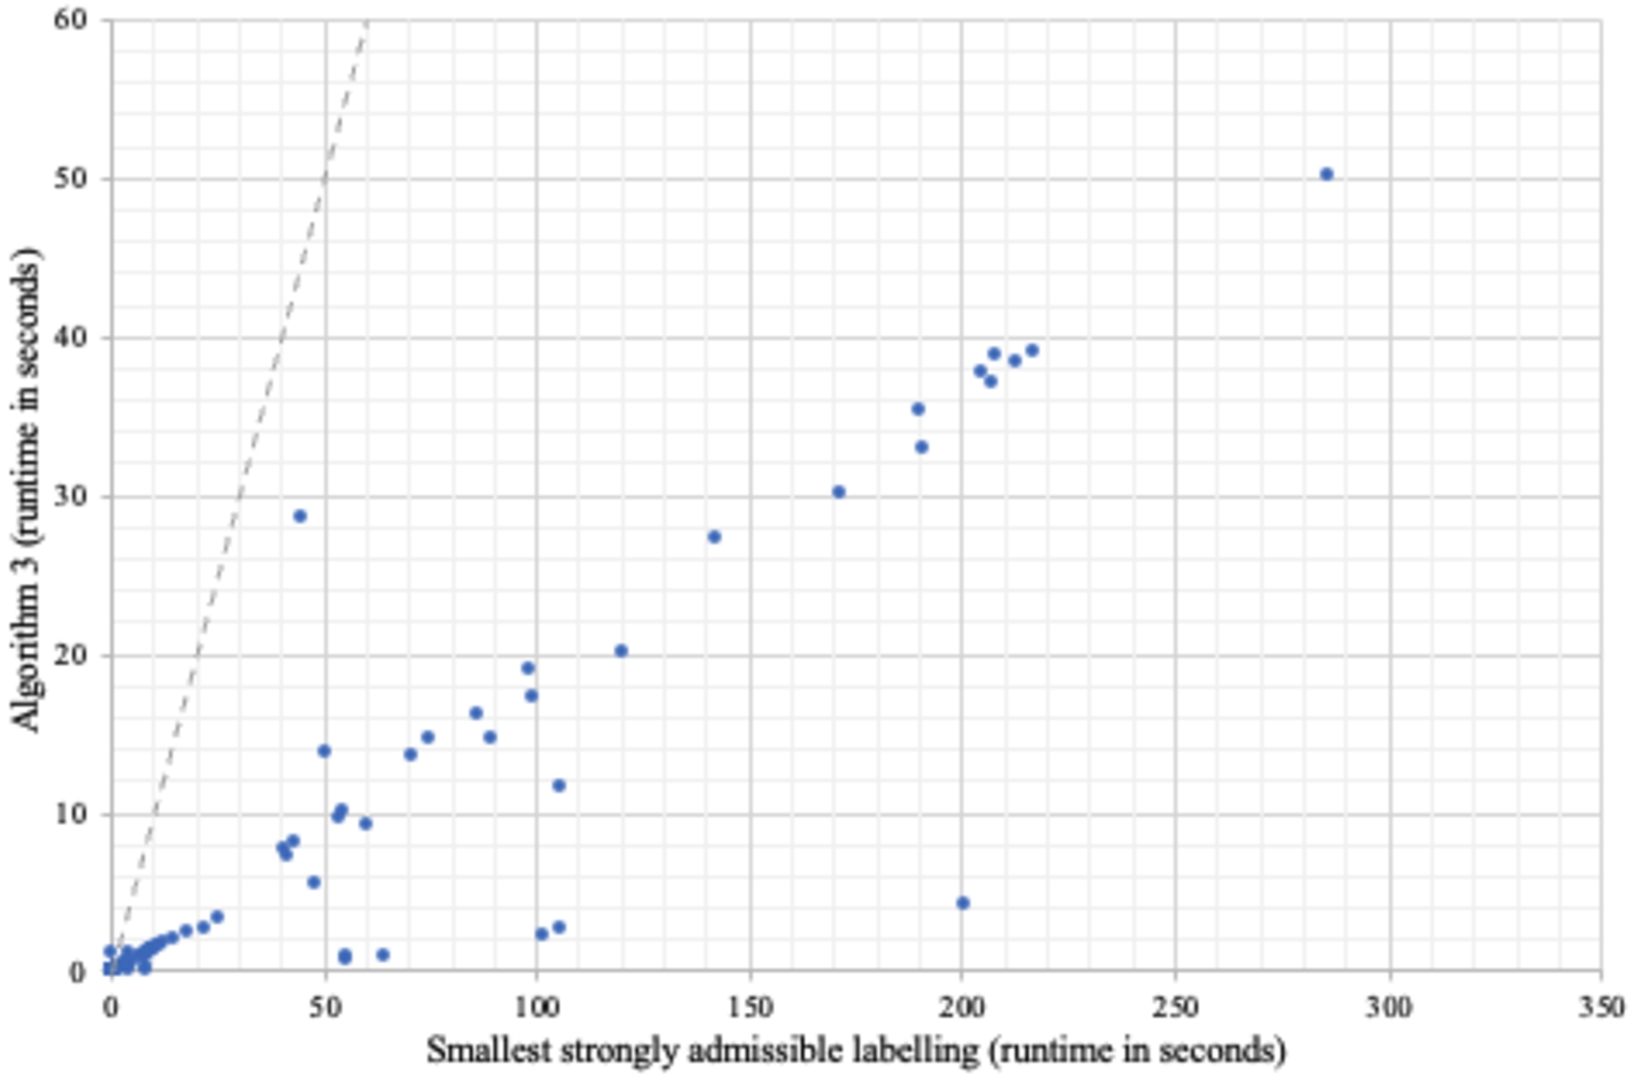 The runtime of computing a smallest admissible labelling using the ASPARTIX encodings compared with the runtime of Algorithm 3.